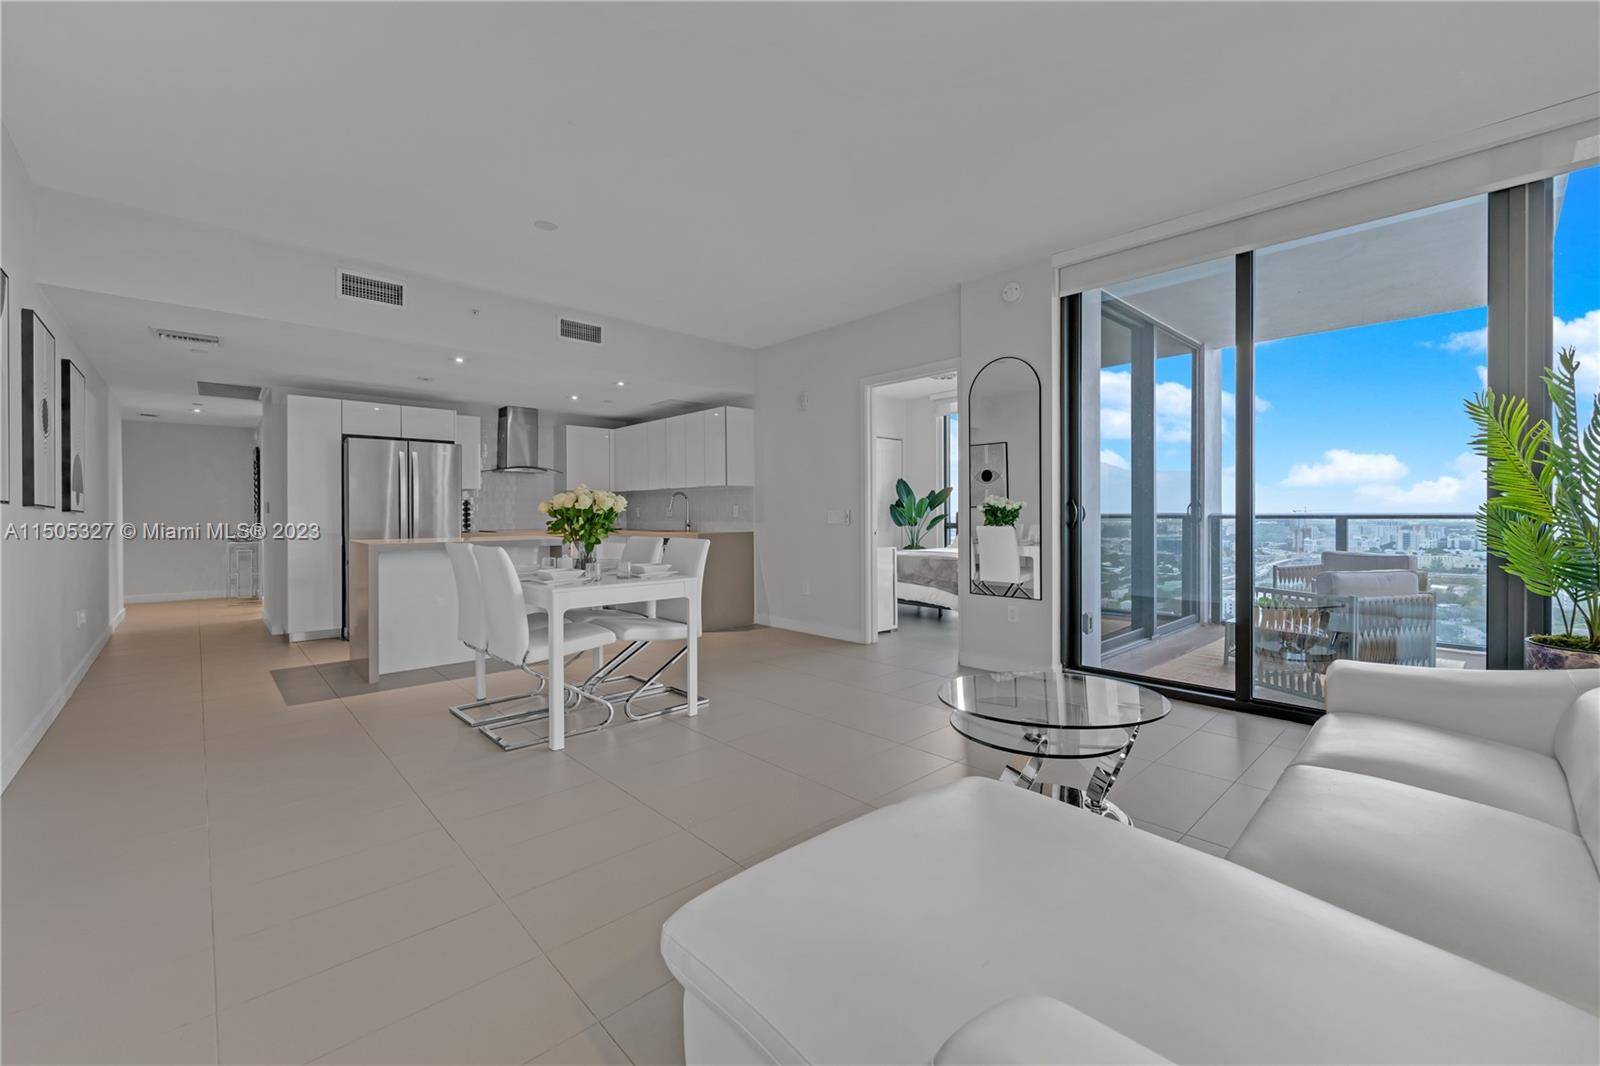 AVAILABLE FROM JULY 20TH 2024, MONTH TO MONTH, SEASONAL OR YEARLY Fully furnished and equipped 2 bed 2 bath in the heart of downtown with sunset and city views.